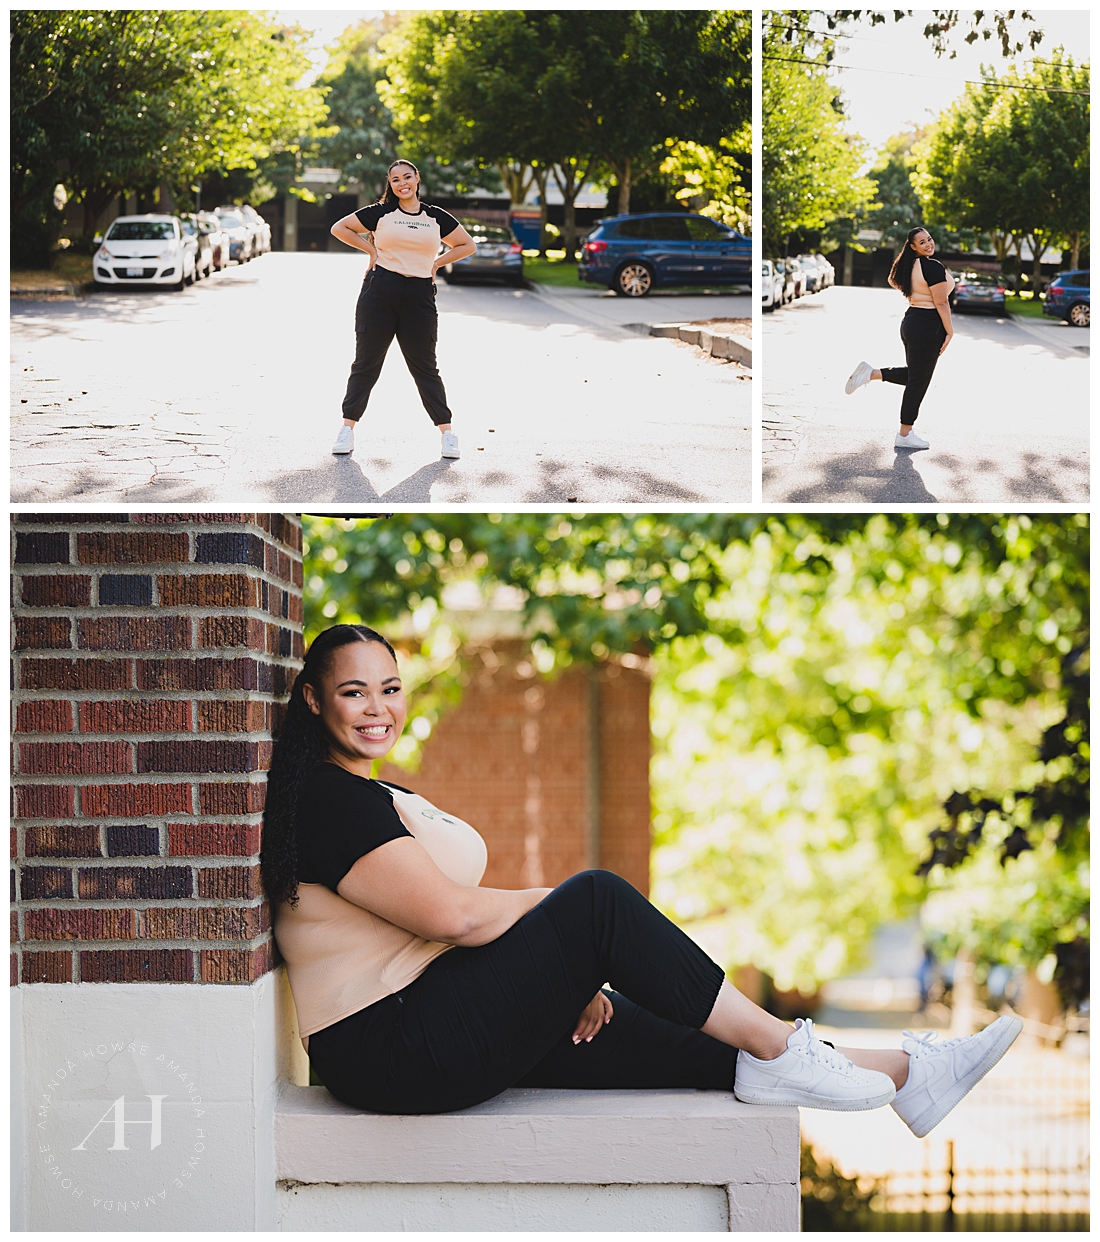 Senior Session in the Street| Cute Poses for Urban Shoots | Photographed by the Best Tacoma Senior Photographer Amanda Howse Photography